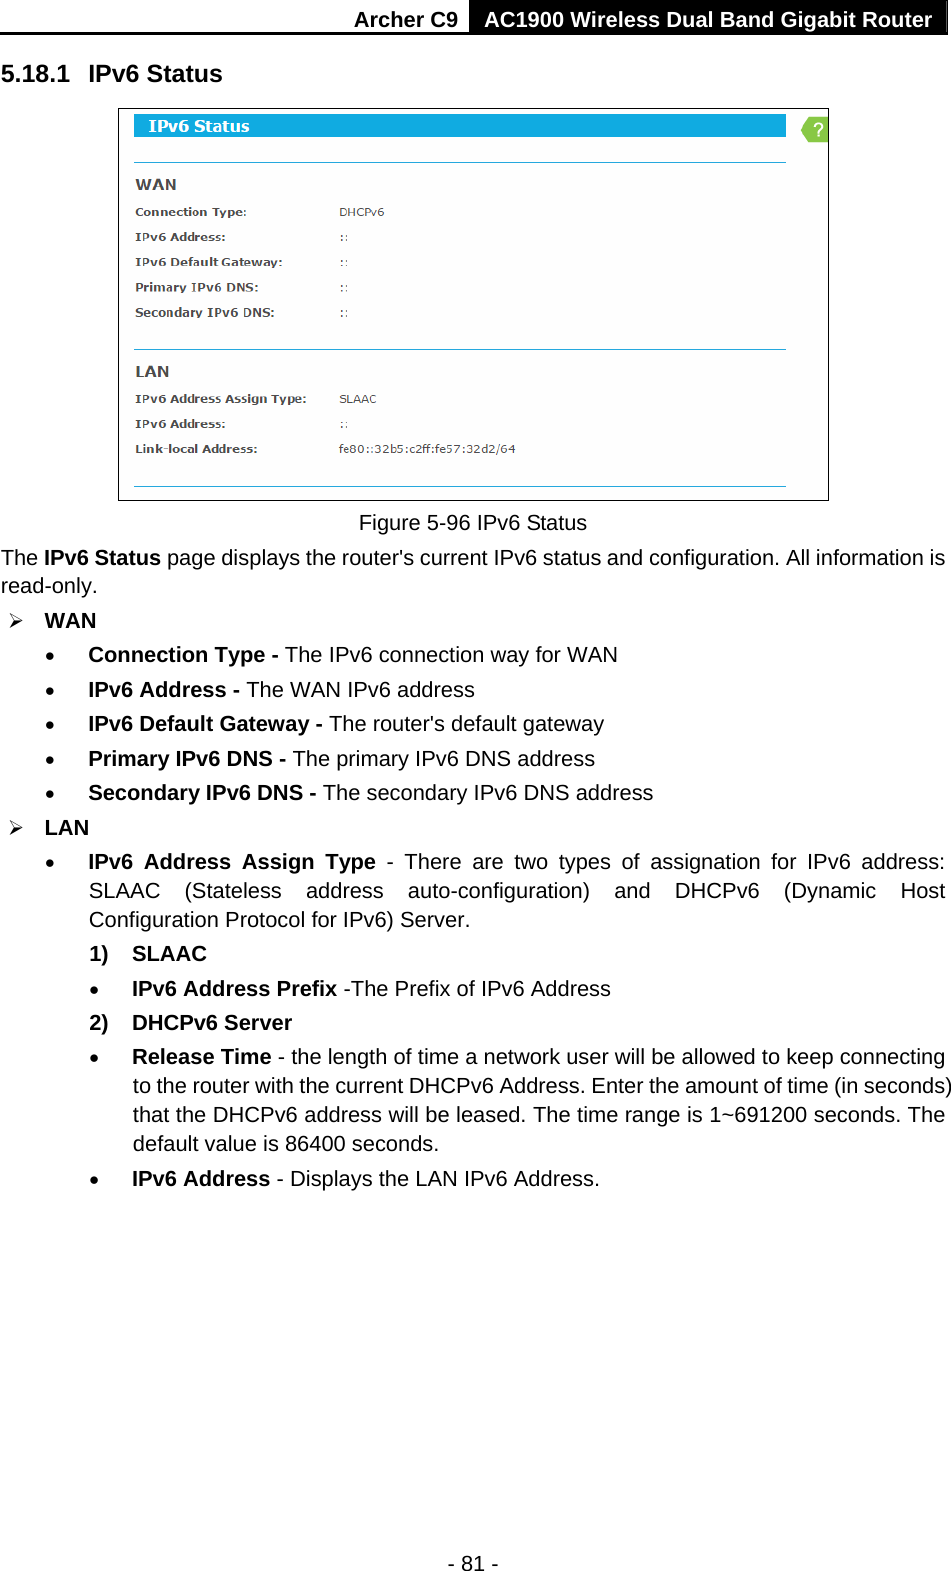 Archer C9 AC1900 Wireless Dual Band Gigabit Router - 81 - 5.18.1  IPv6 Status  Figure 5-96 IPv6 Status The IPv6 Status page displays the router&apos;s current IPv6 status and configuration. All information is read-only.   WAN    Connection Type - The IPv6 connection way for WAN  IPv6 Address - The WAN IPv6 address  IPv6 Default Gateway - The router&apos;s default gateway  Primary IPv6 DNS - The primary IPv6 DNS address  Secondary IPv6 DNS - The secondary IPv6 DNS address  LAN  IPv6 Address Assign Type - There are two types of assignation for IPv6 address: SLAAC (Stateless address auto-configuration) and DHCPv6 (Dynamic Host Configuration Protocol for IPv6) Server. 1) SLAAC  IPv6 Address Prefix -The Prefix of IPv6 Address 2) DHCPv6 Server  Release Time - the length of time a network user will be allowed to keep connecting to the router with the current DHCPv6 Address. Enter the amount of time (in seconds) that the DHCPv6 address will be leased. The time range is 1~691200 seconds. The default value is 86400 seconds.  IPv6 Address - Displays the LAN IPv6 Address. 